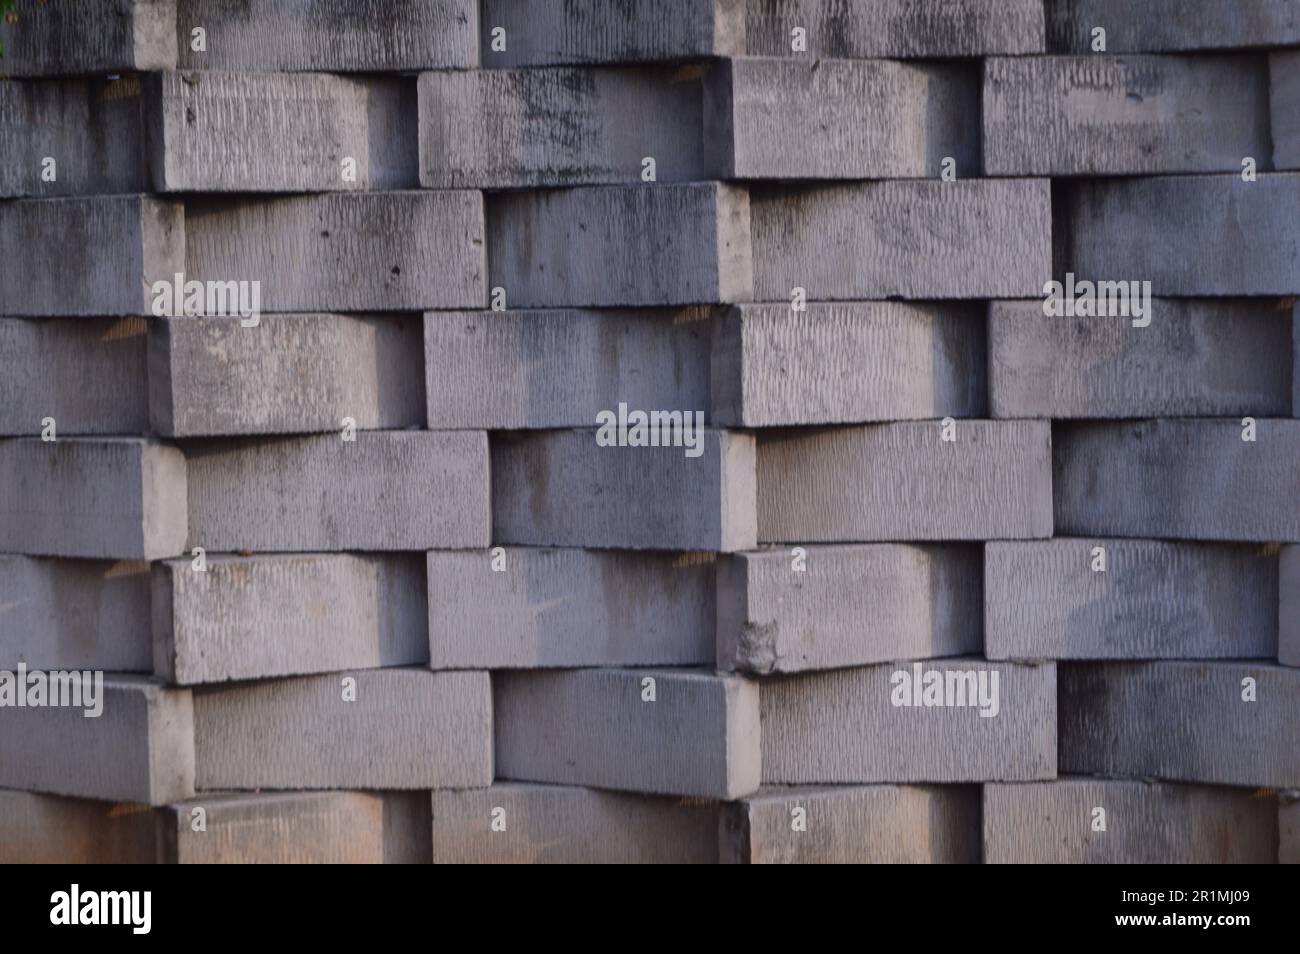 background pattern, shape, texture of walls or walls made of light brick material or white Hebel brick Stock Photo